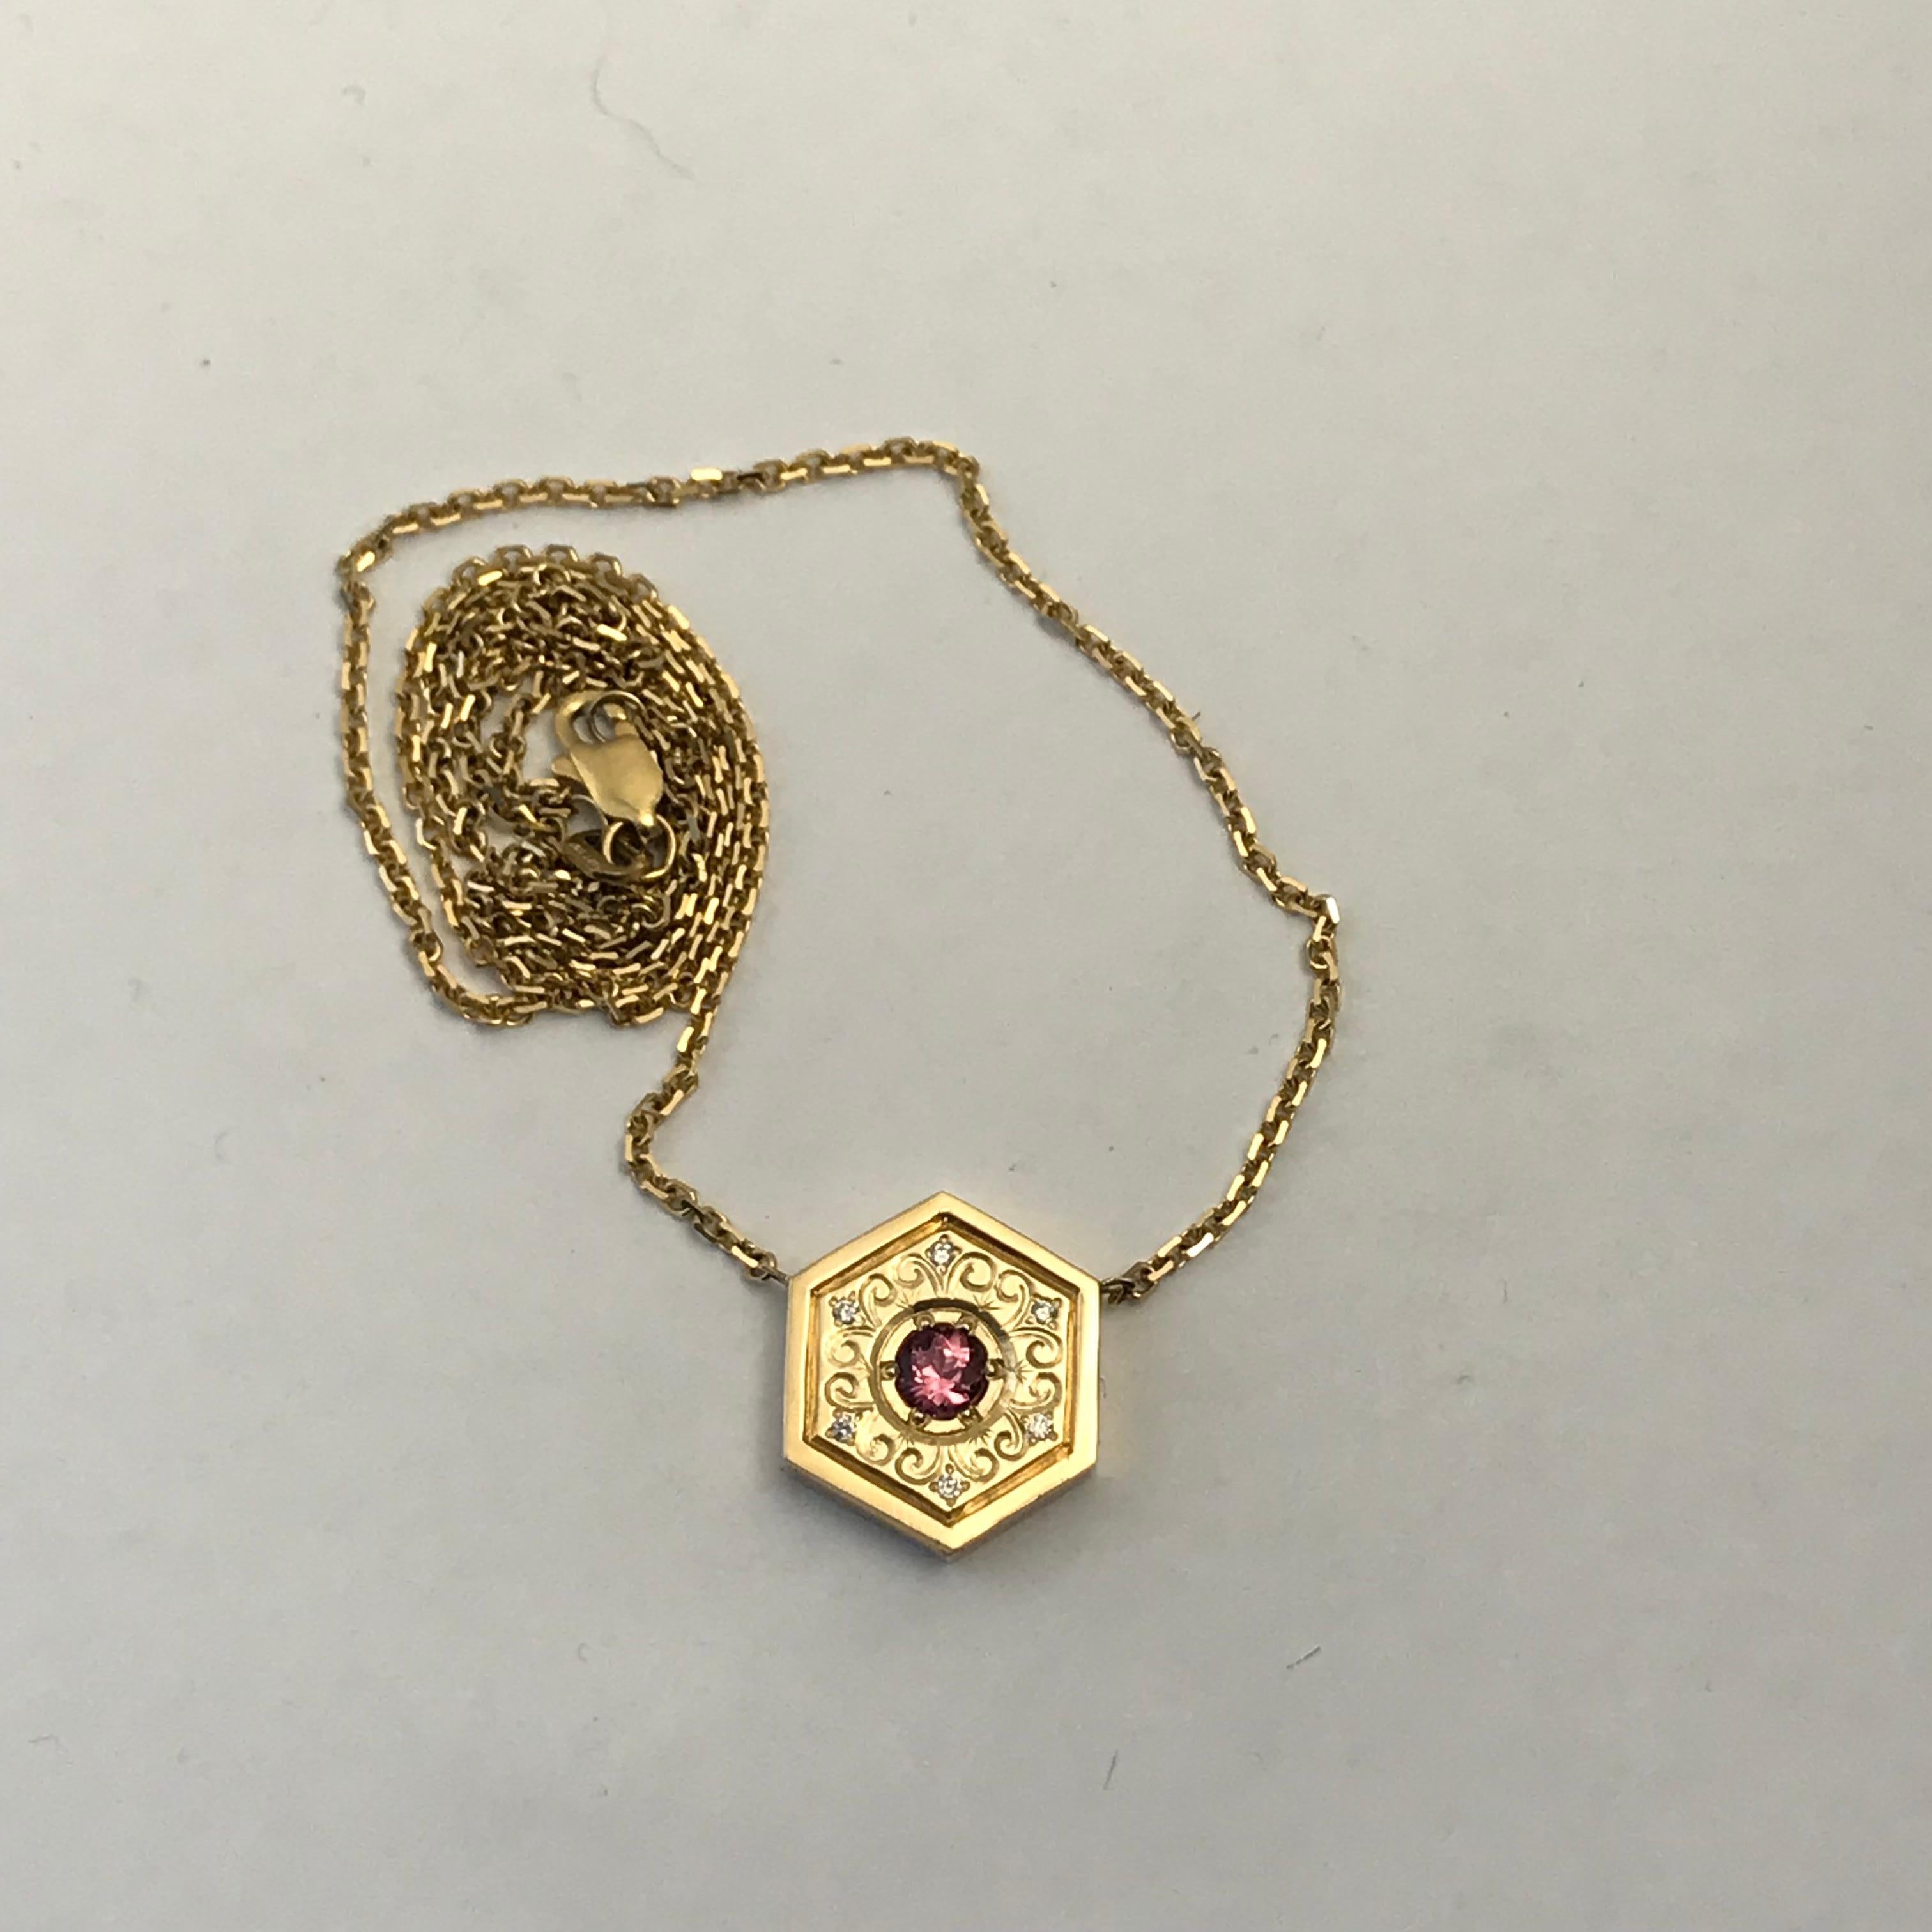 Hexagon Necklace in 14 Karat Gold and Gems-Pink Sapphire Flower For Sale 2